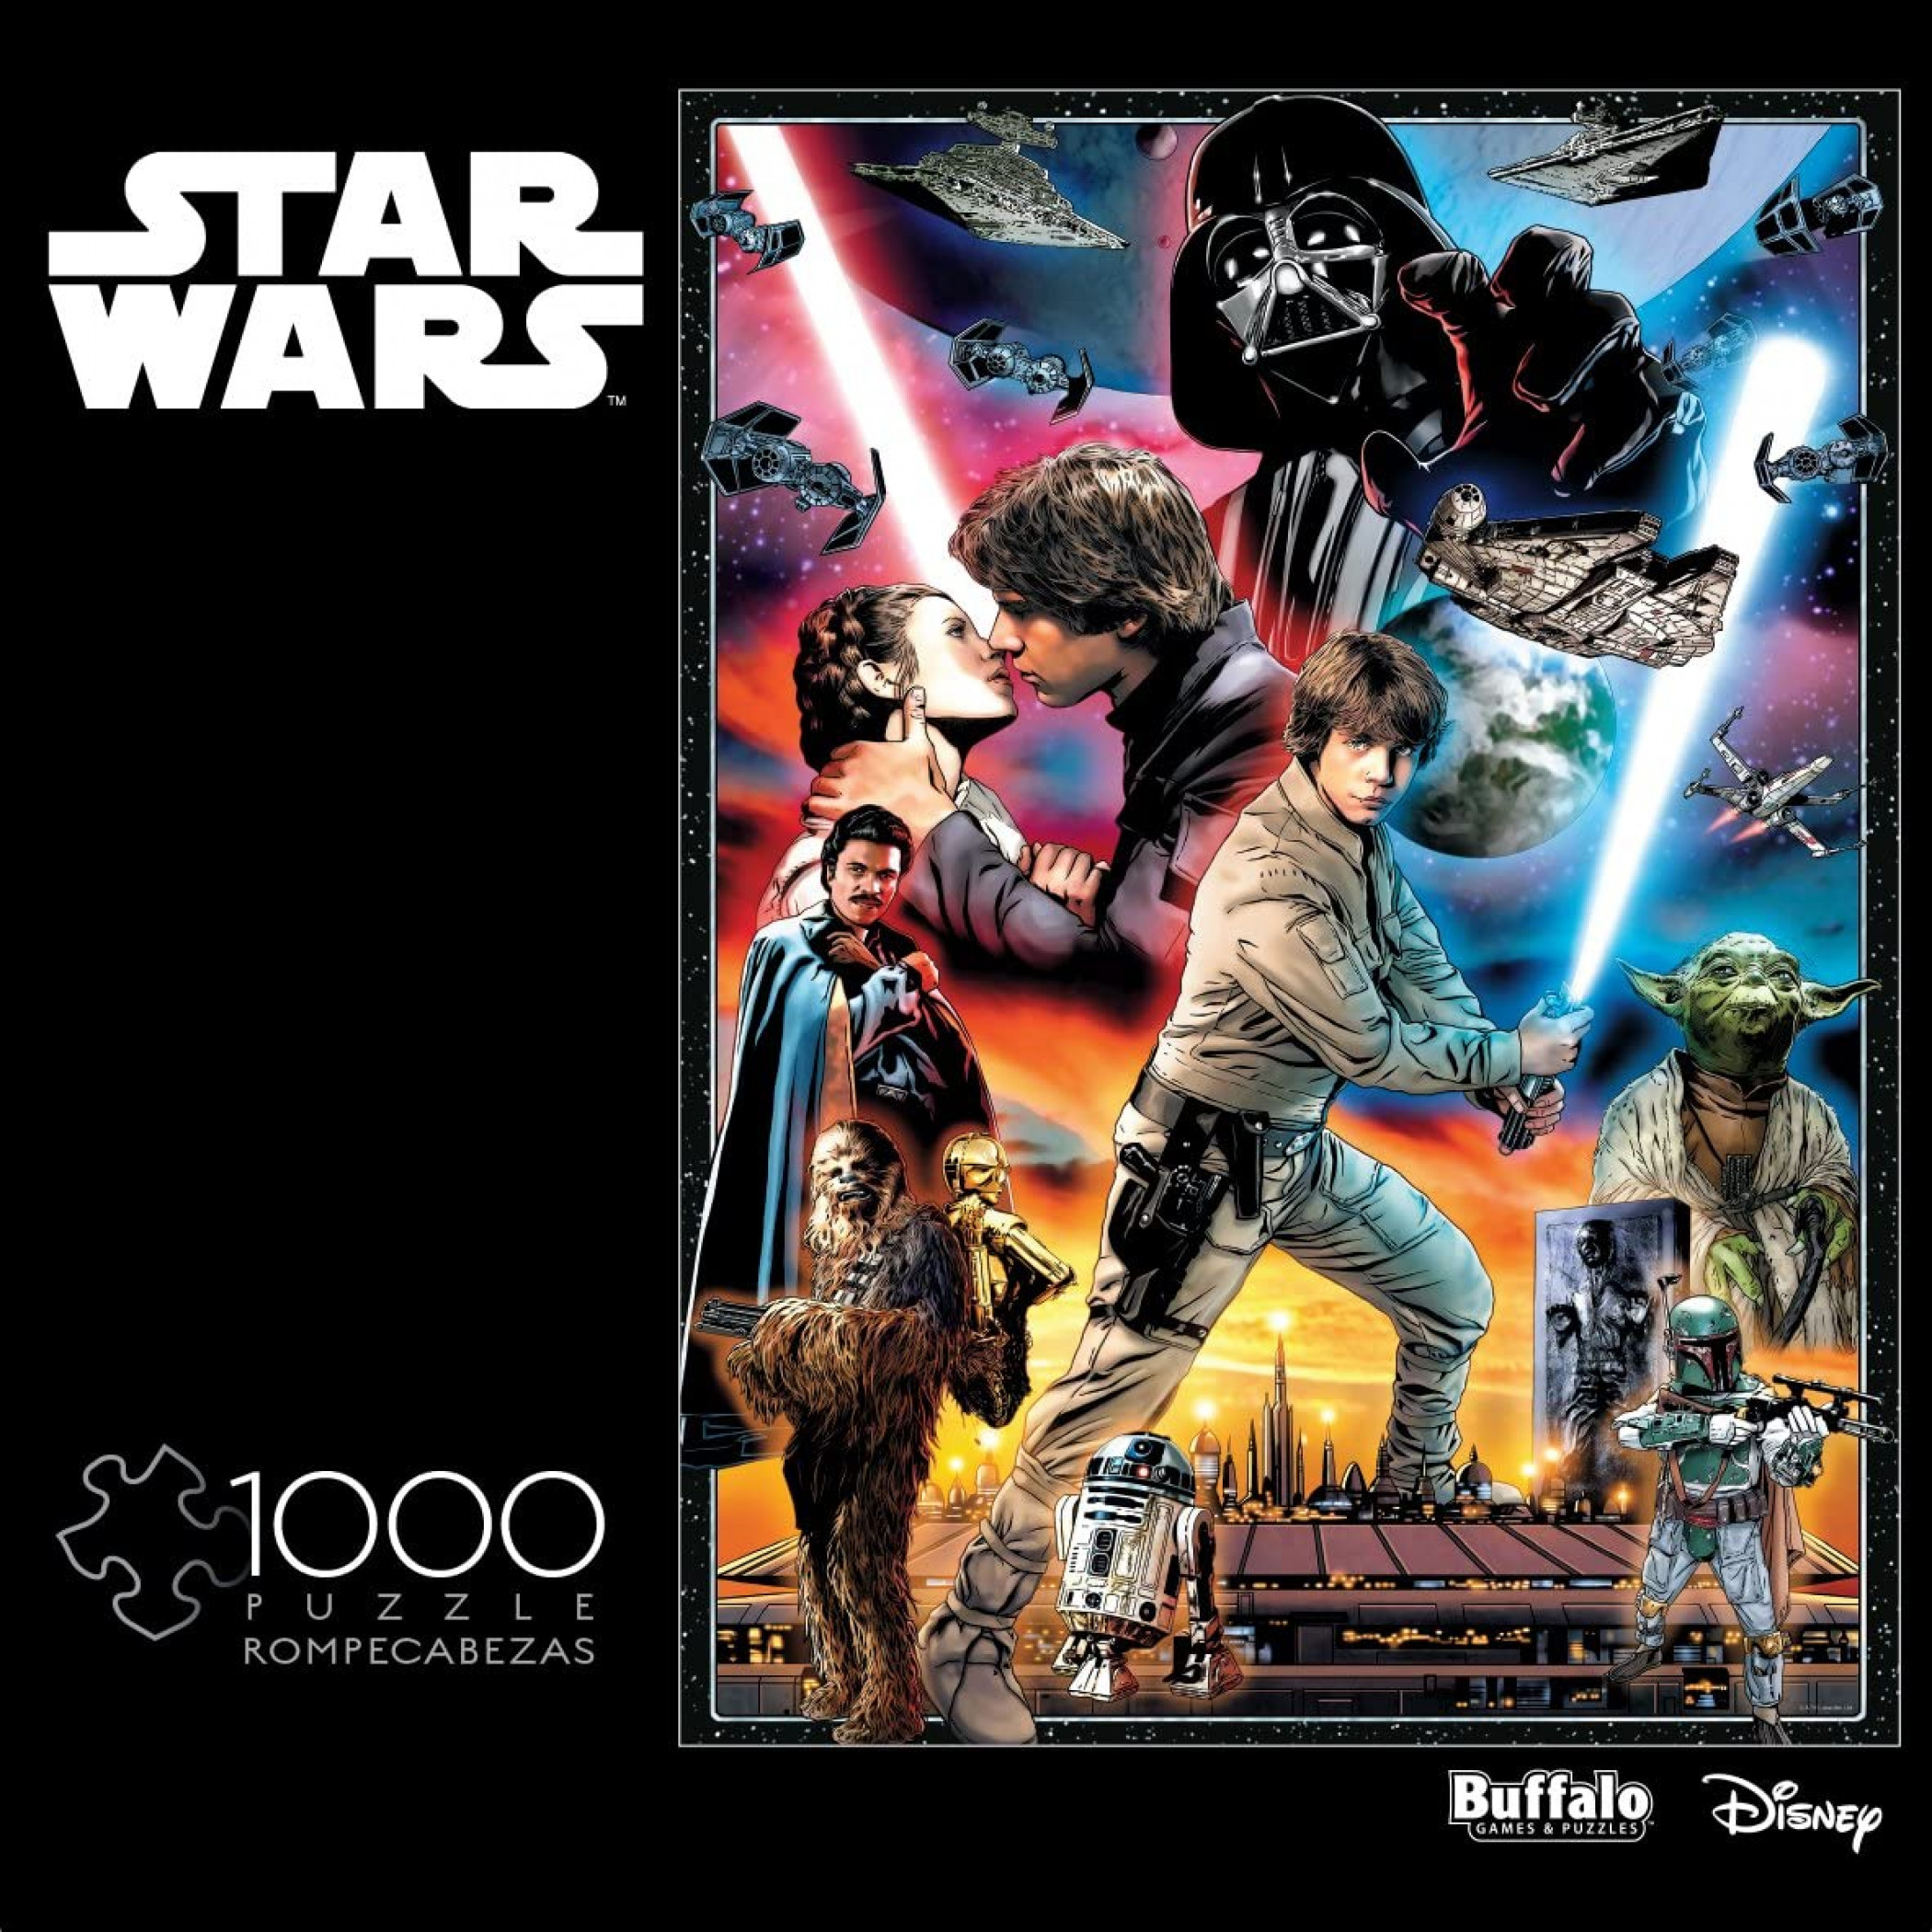 Star Wars The Empire Strikes Back Collage 1000 Piece Jigsaw Puzzle